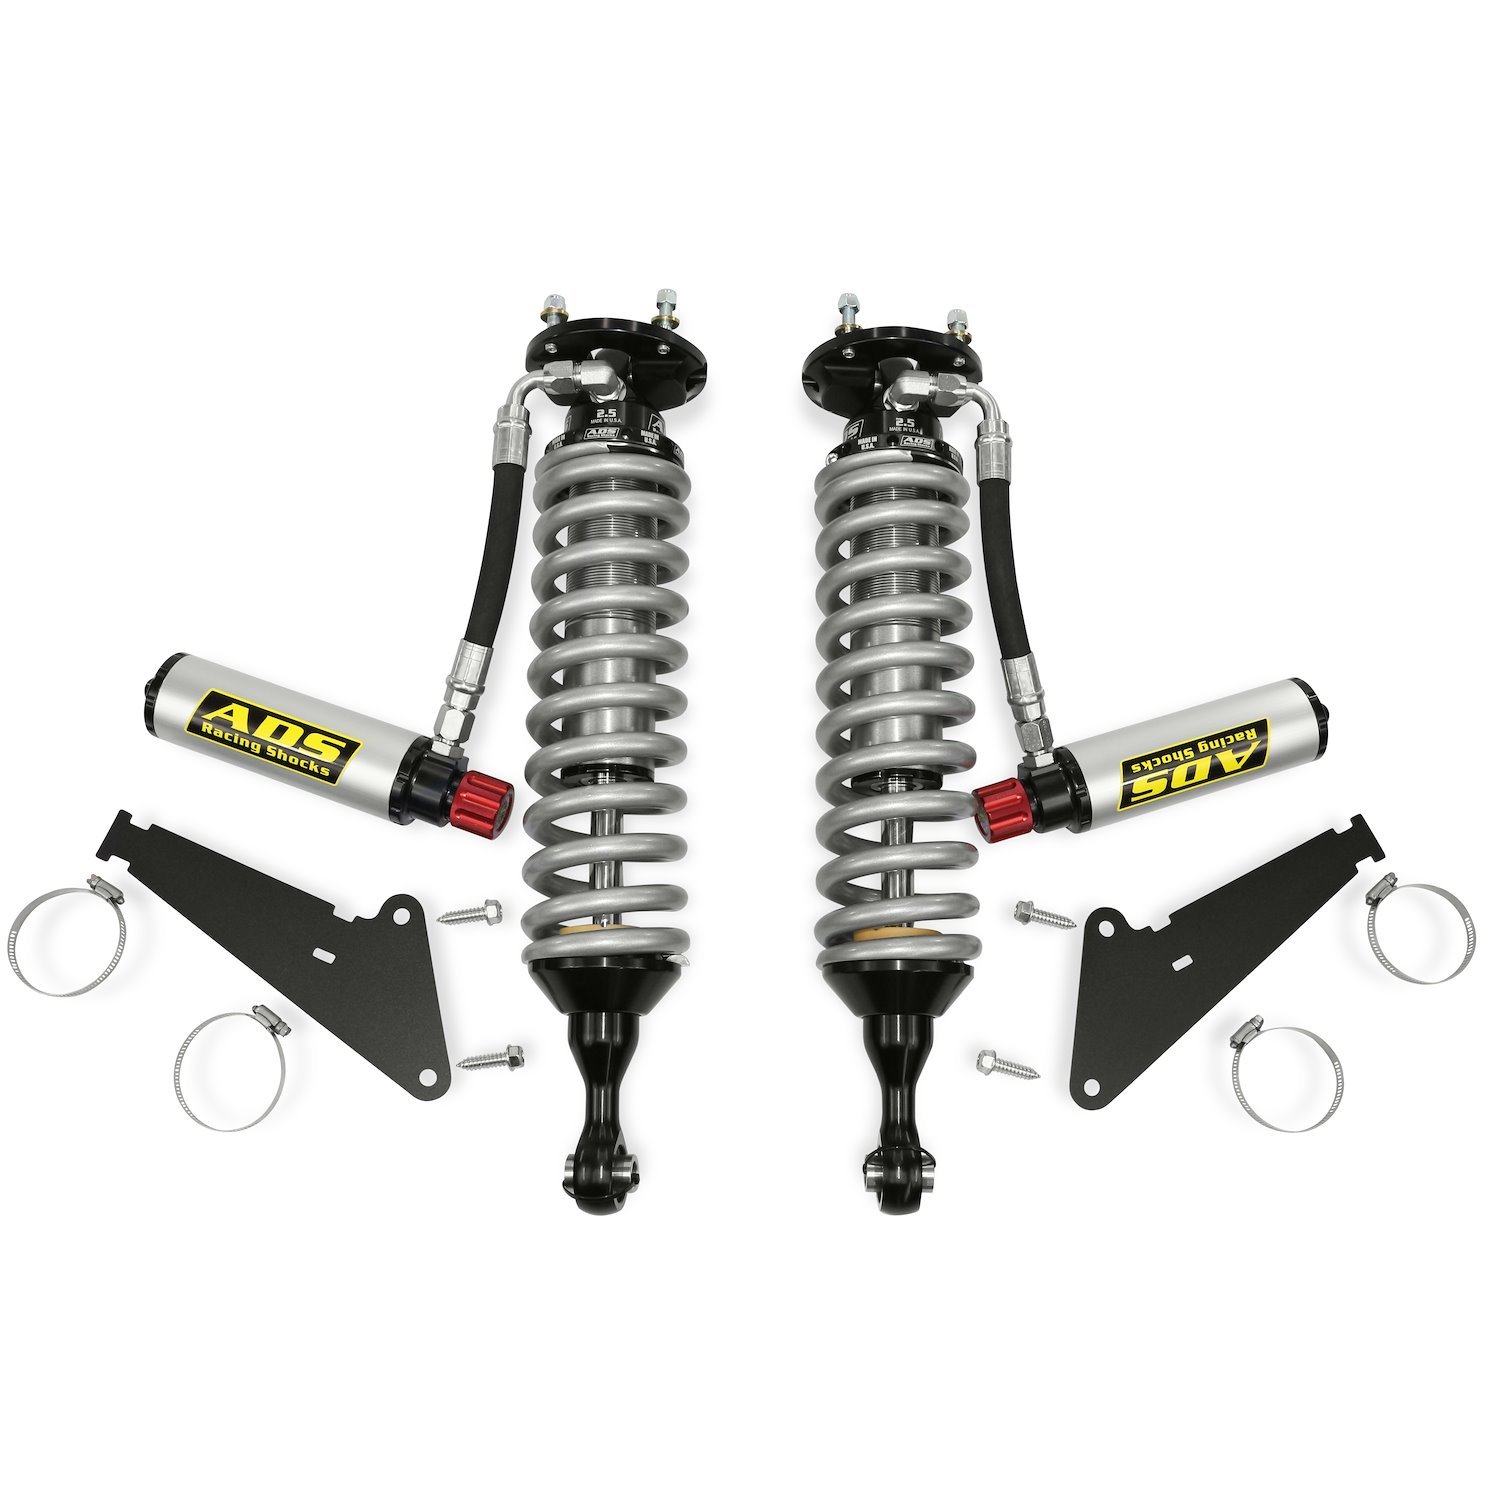 250-TN220-055 Racing Bolt-On Shocks, Fits Select Toyota Tundra, Toyota Sequoia, 2.5 in., w/ Remote Reservoir